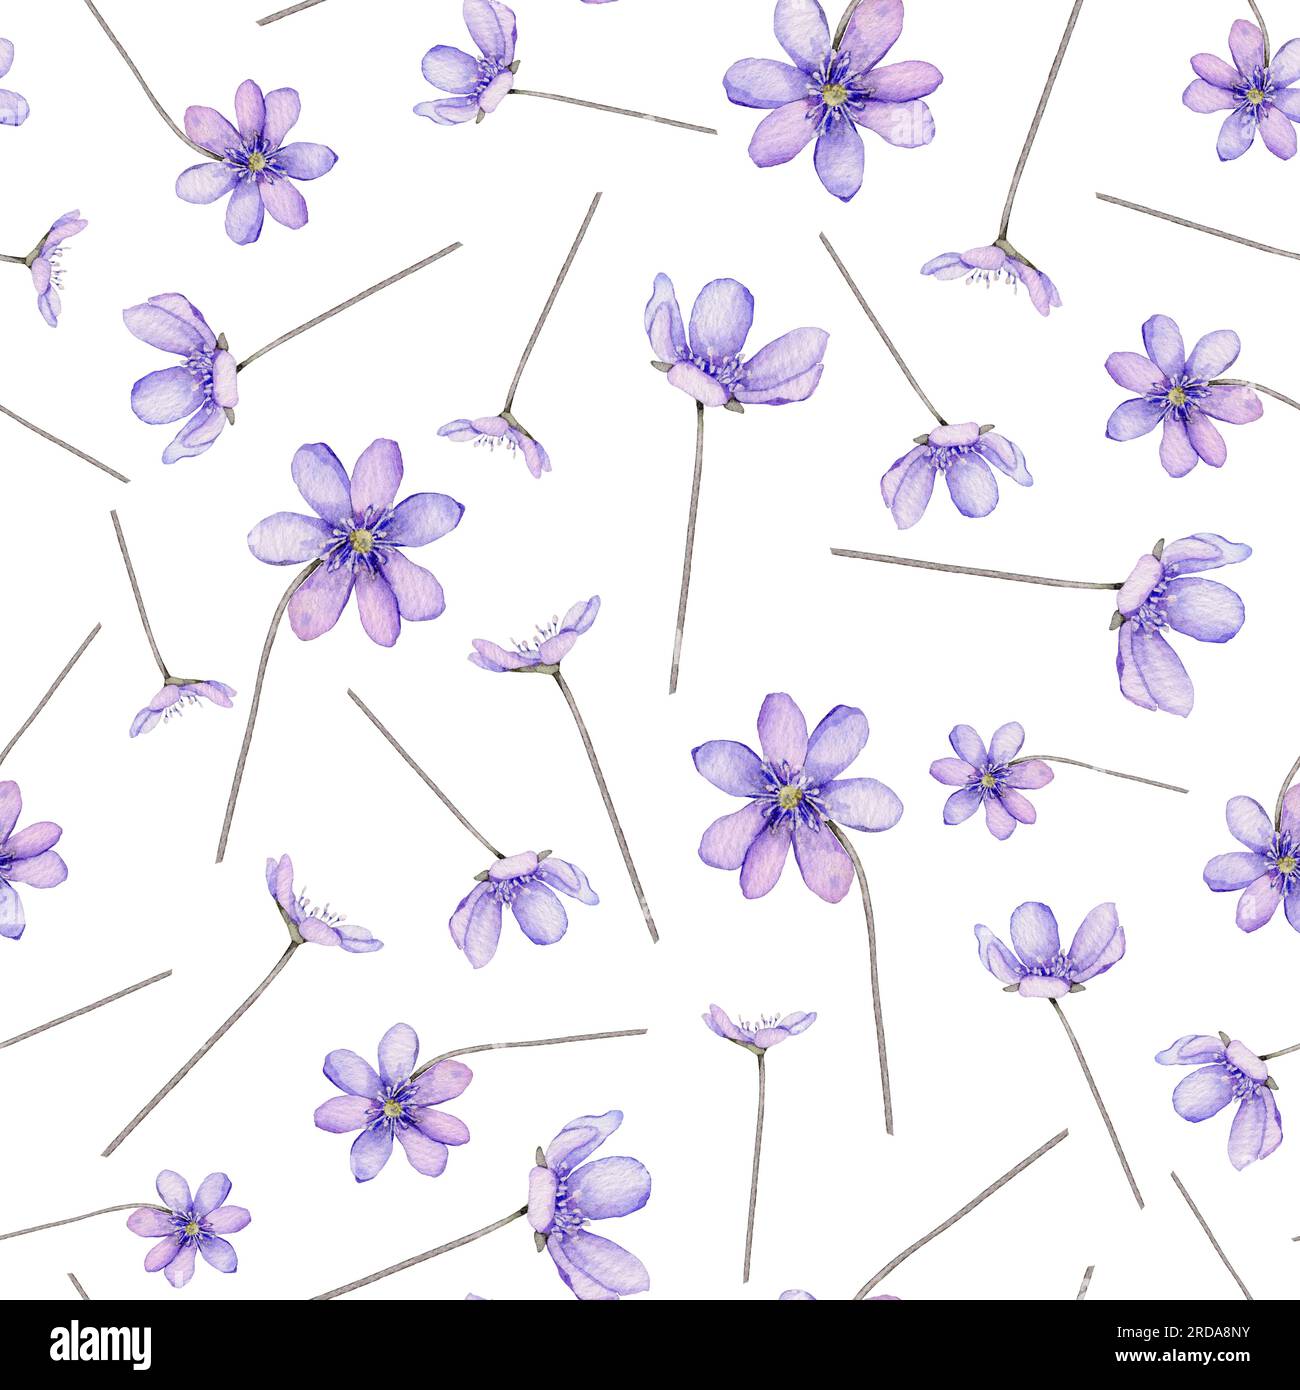 Seamless pattern watercolor spring flowers. Scilla. Coppice, hepatica - first spring flowers. Illustration of delicate lilac flowers. Primroses, the Stock Photo